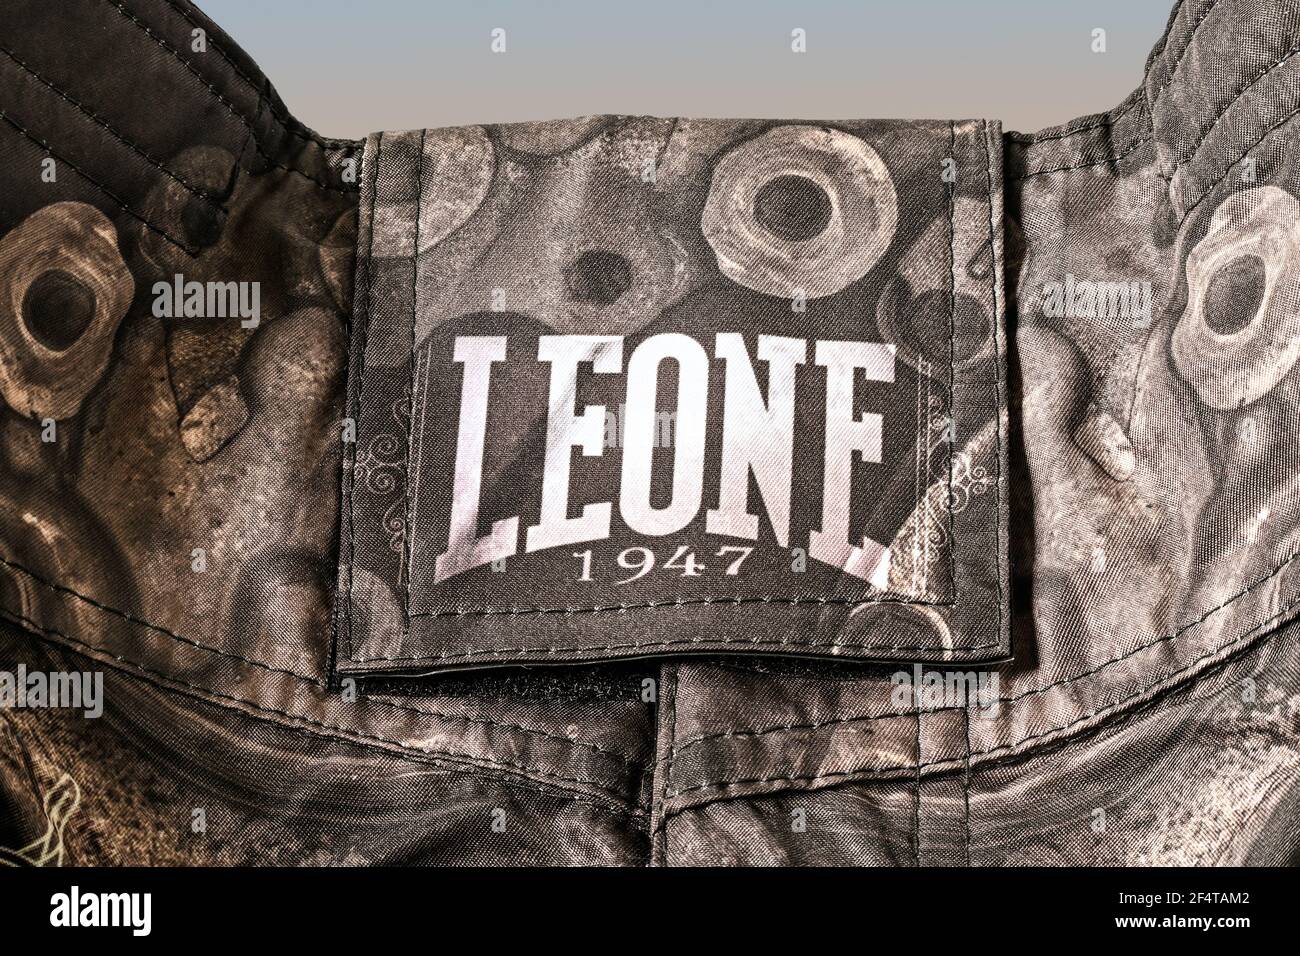 BRAUNSCHWEIG, GERMANY - MARCH 22, 2021: LEONE 1947 Italy Mixed Martial Arts  (MMA) Shorts in closeup. Italian sportswear, specialized in combat sports  Stock Photo - Alamy